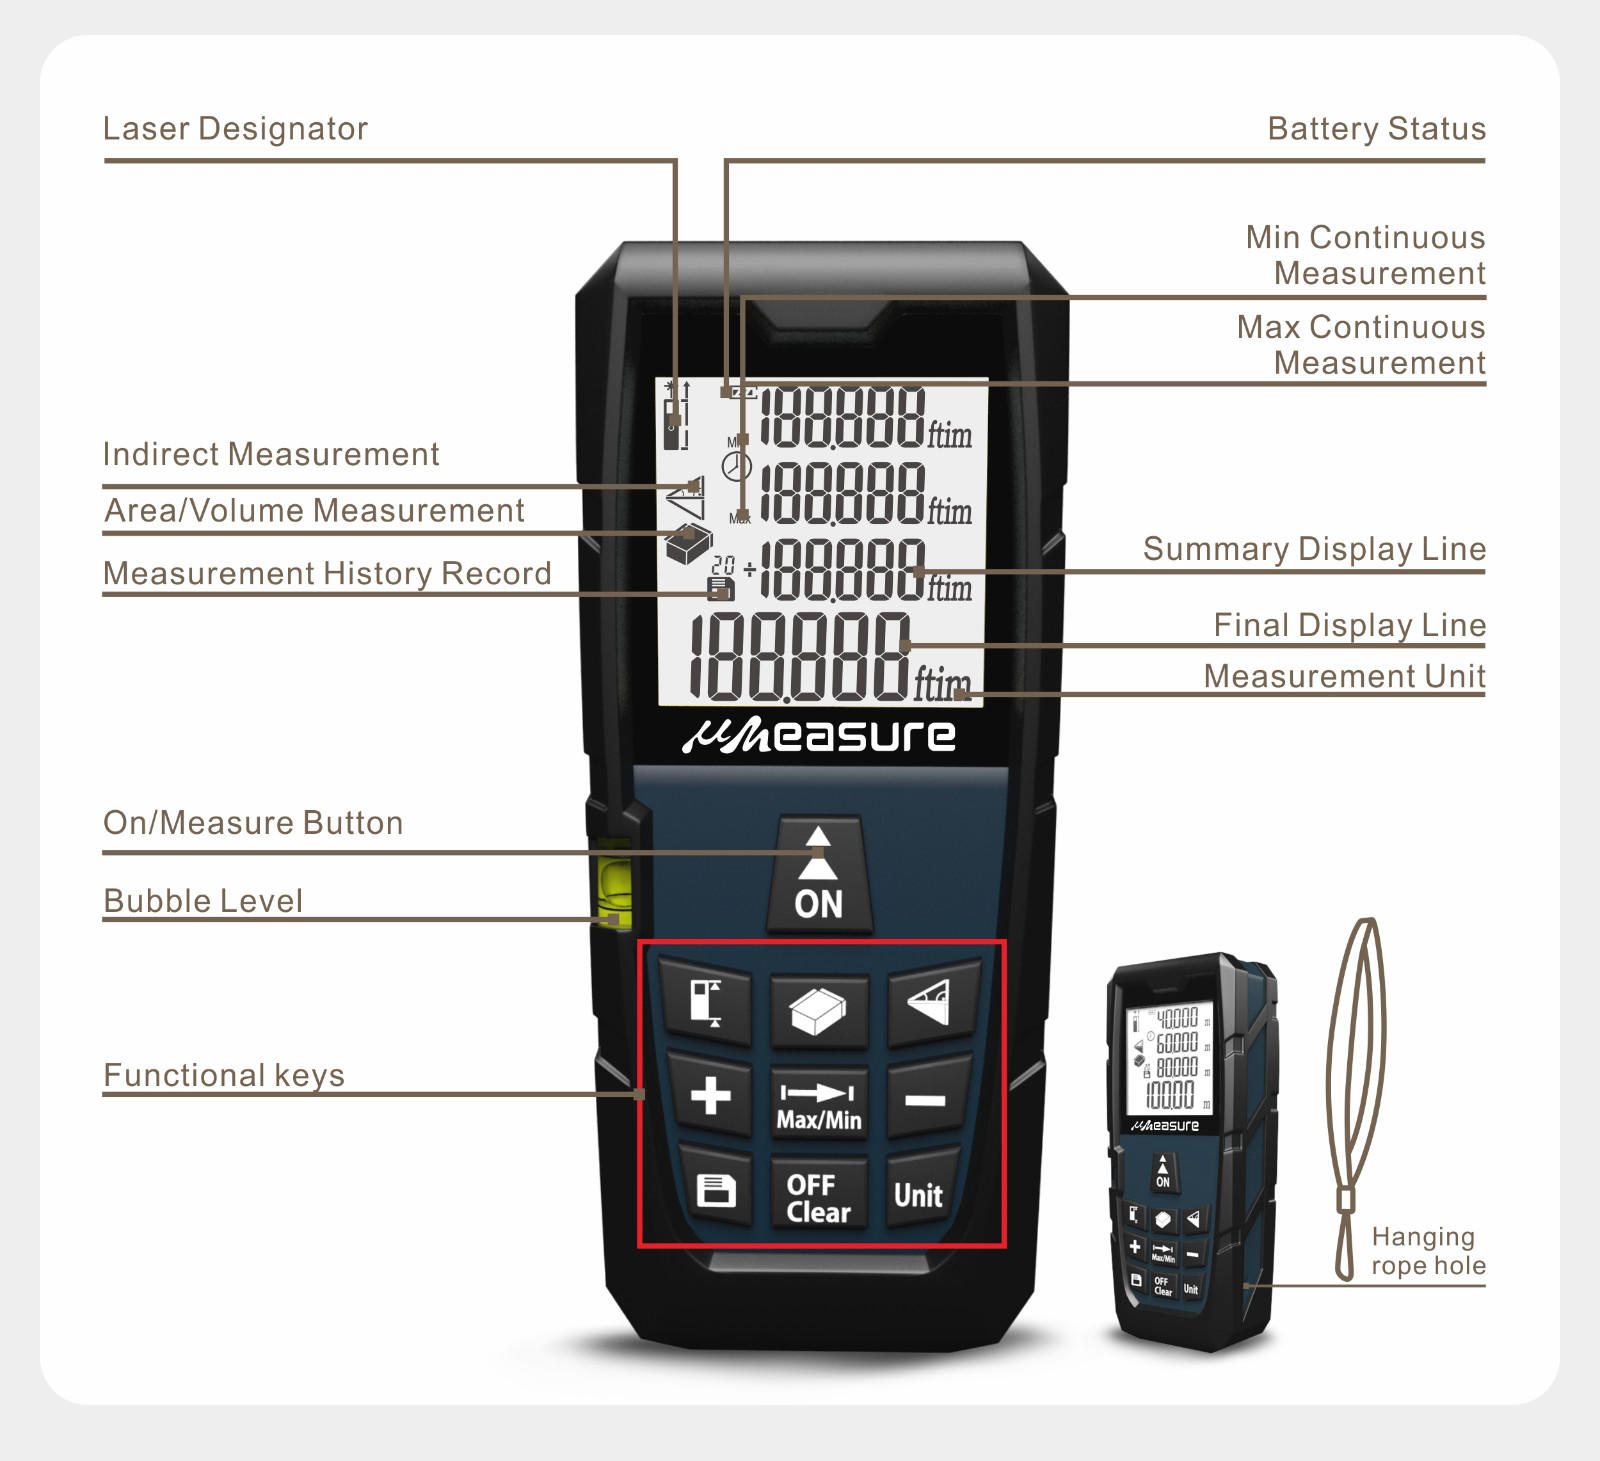 UMeasure carrying laser measuring device manufacturers measurement for worker